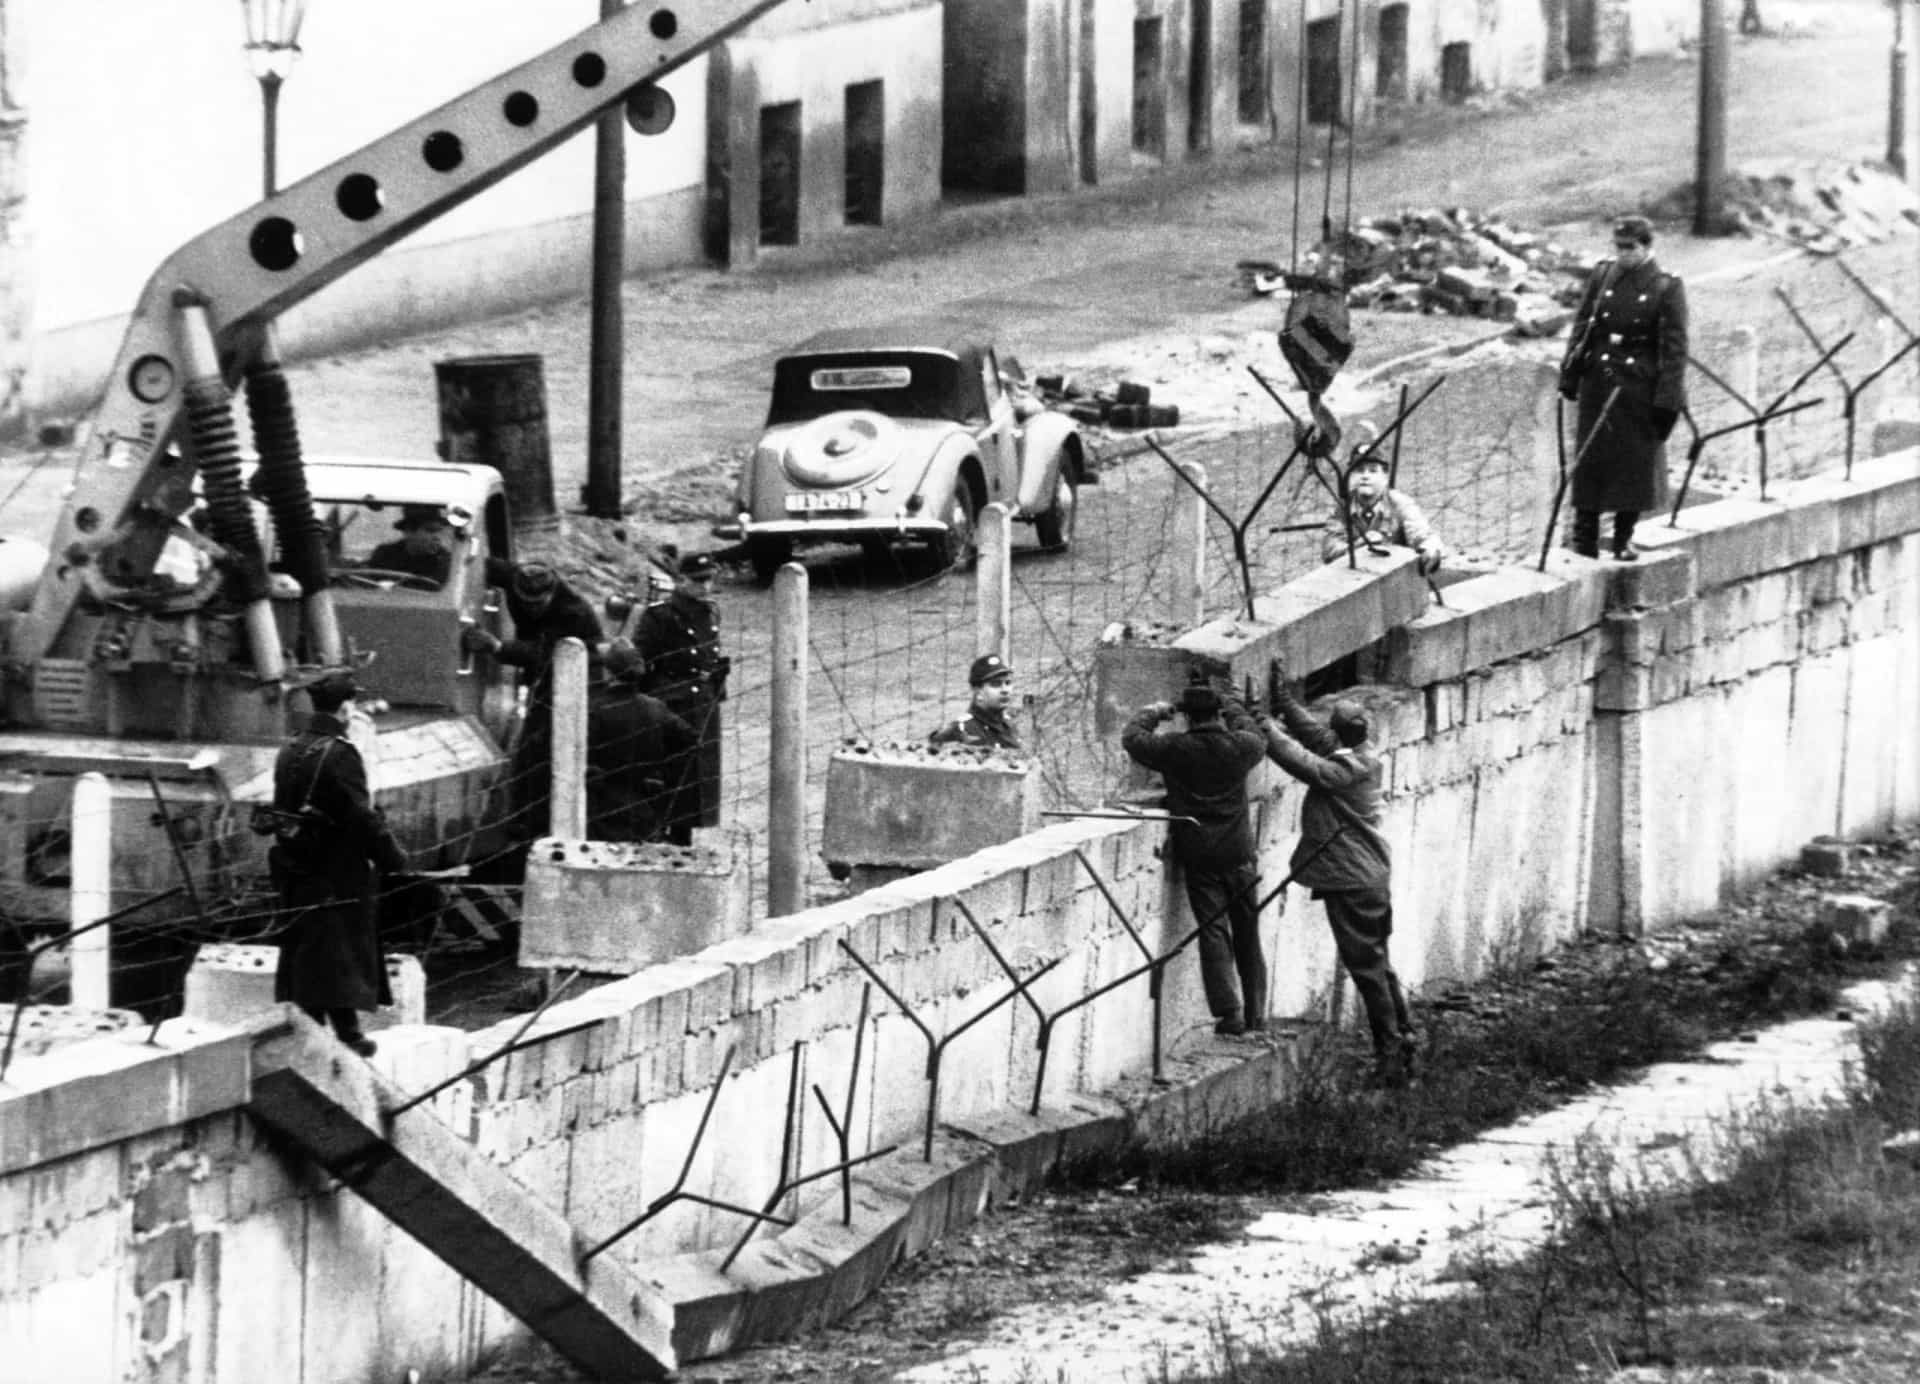 <p>The Berlin Wall, the guarded concrete barricade that physically divided the city from 1961 to 1989, also served as an ideological barrier.</p>